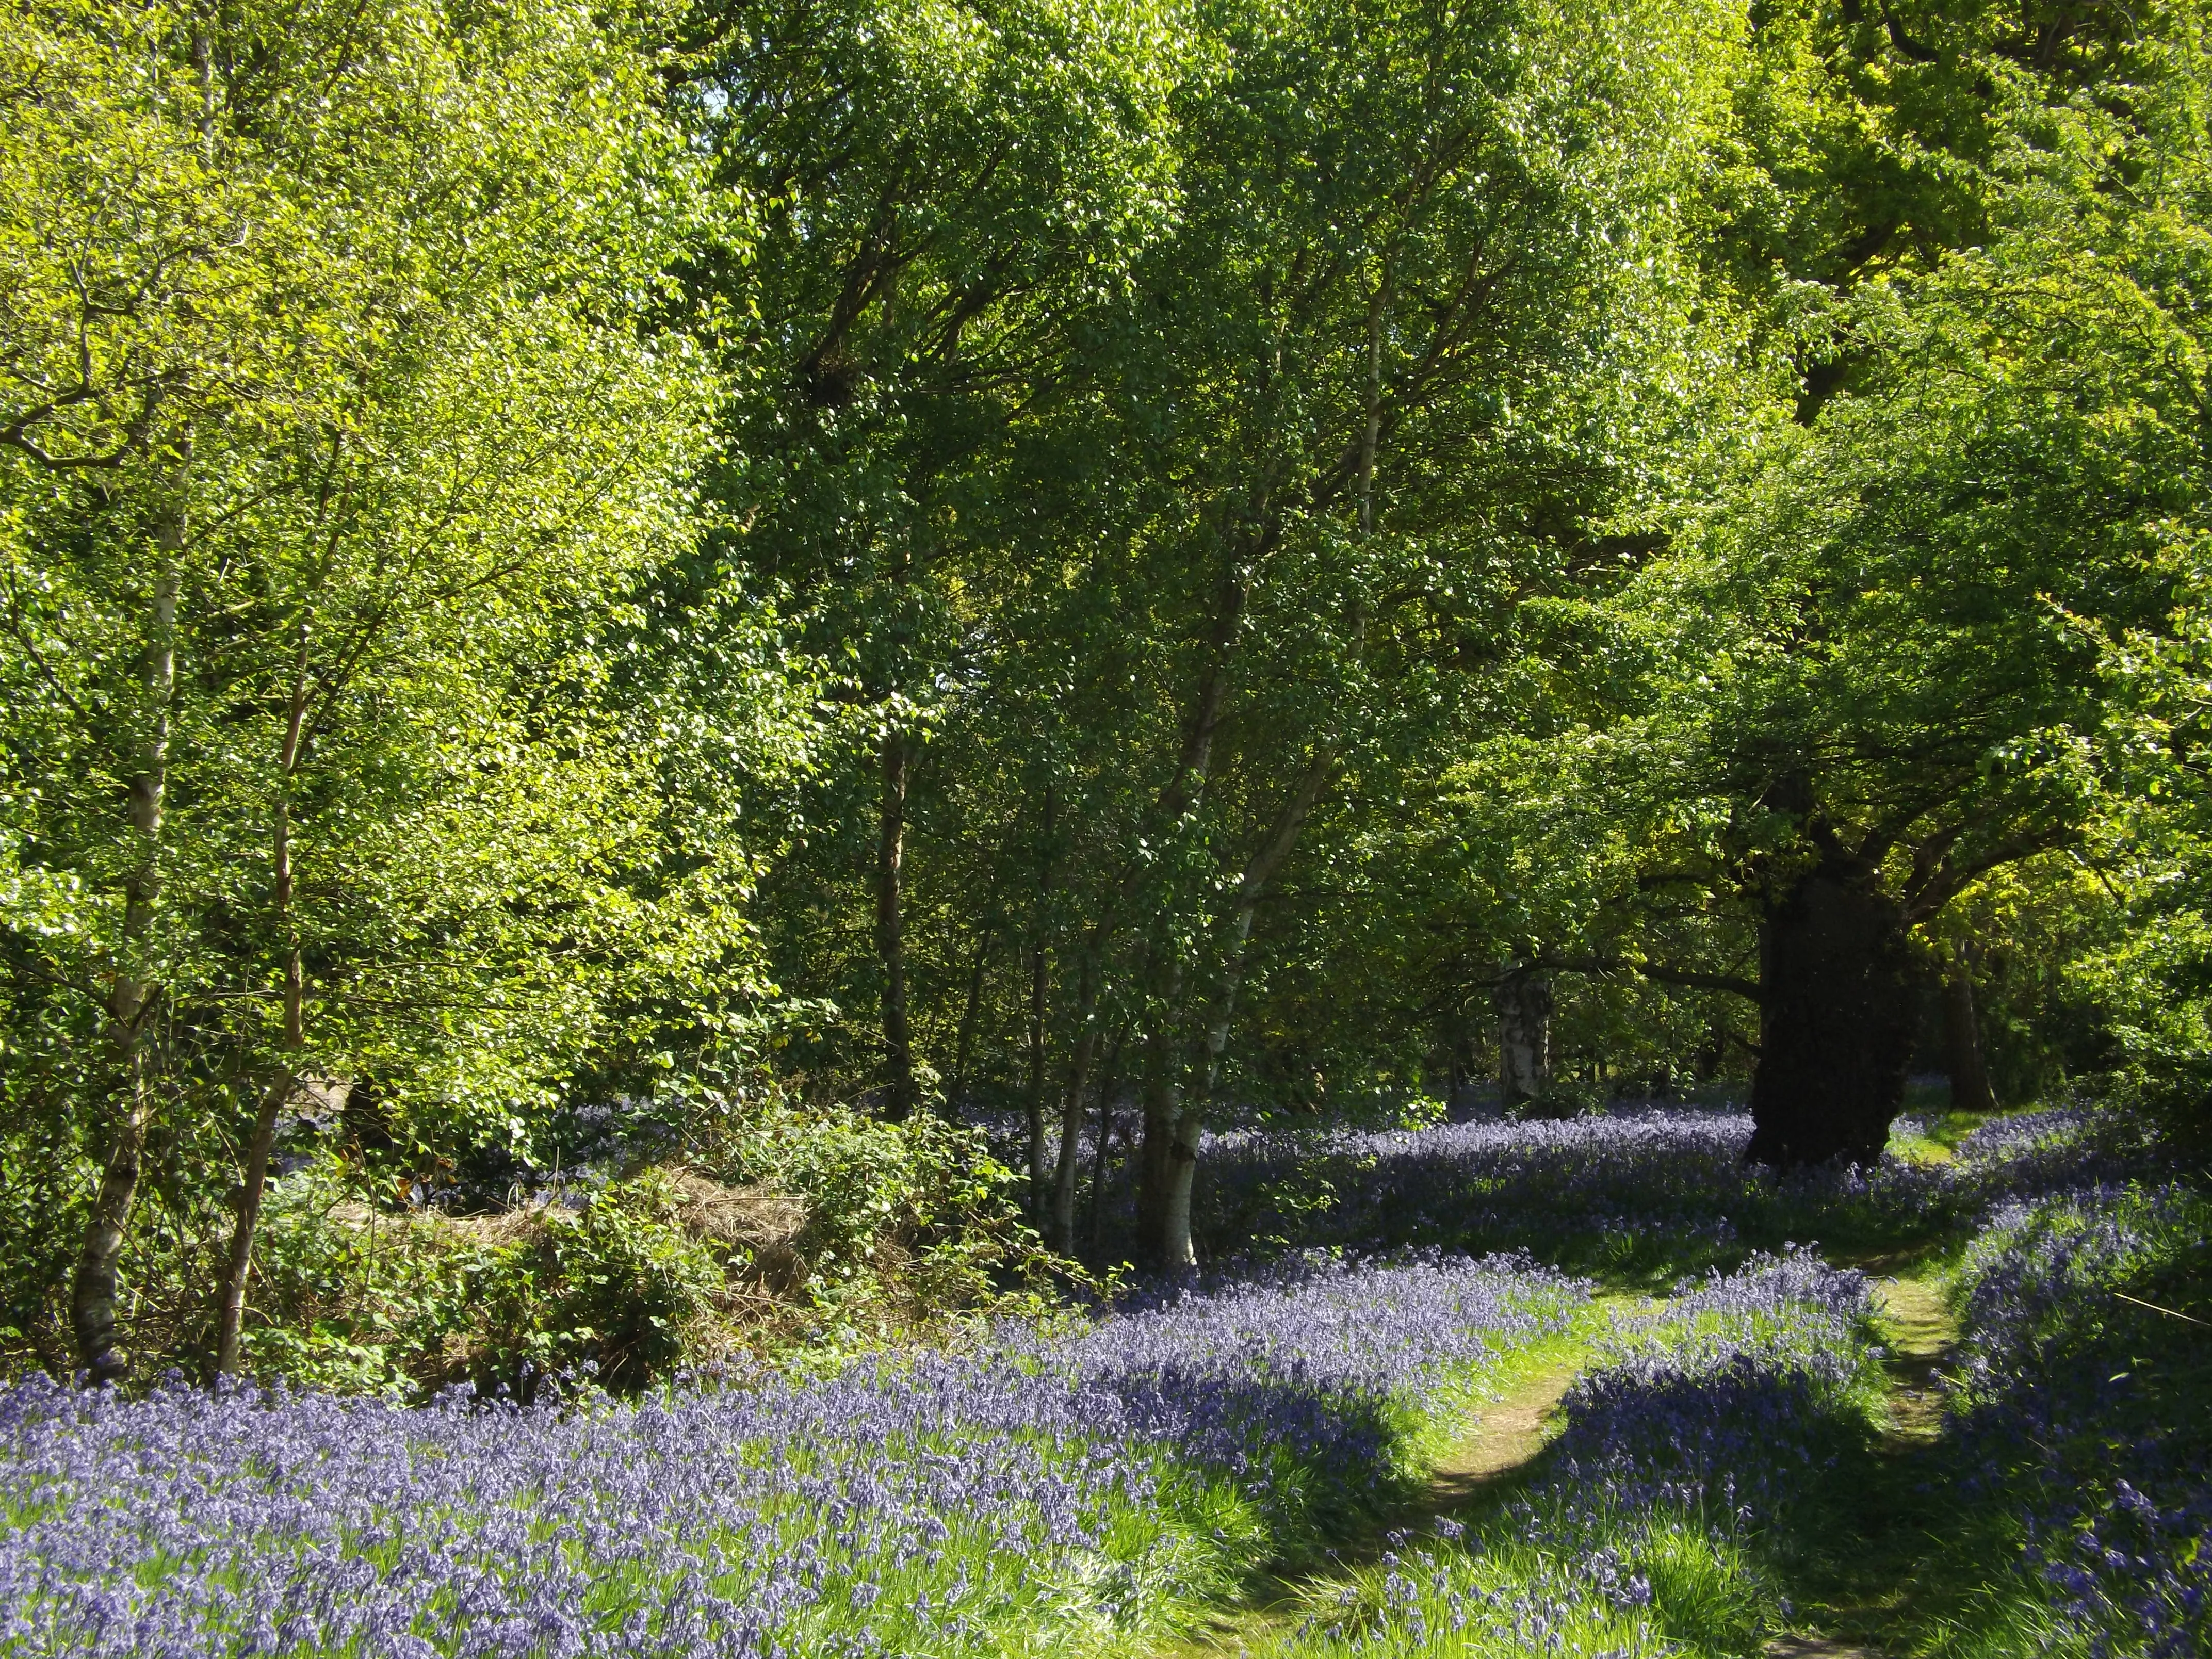 Photograph of North Cliffe Woods Nature Reserve, Yorkshire Wolds